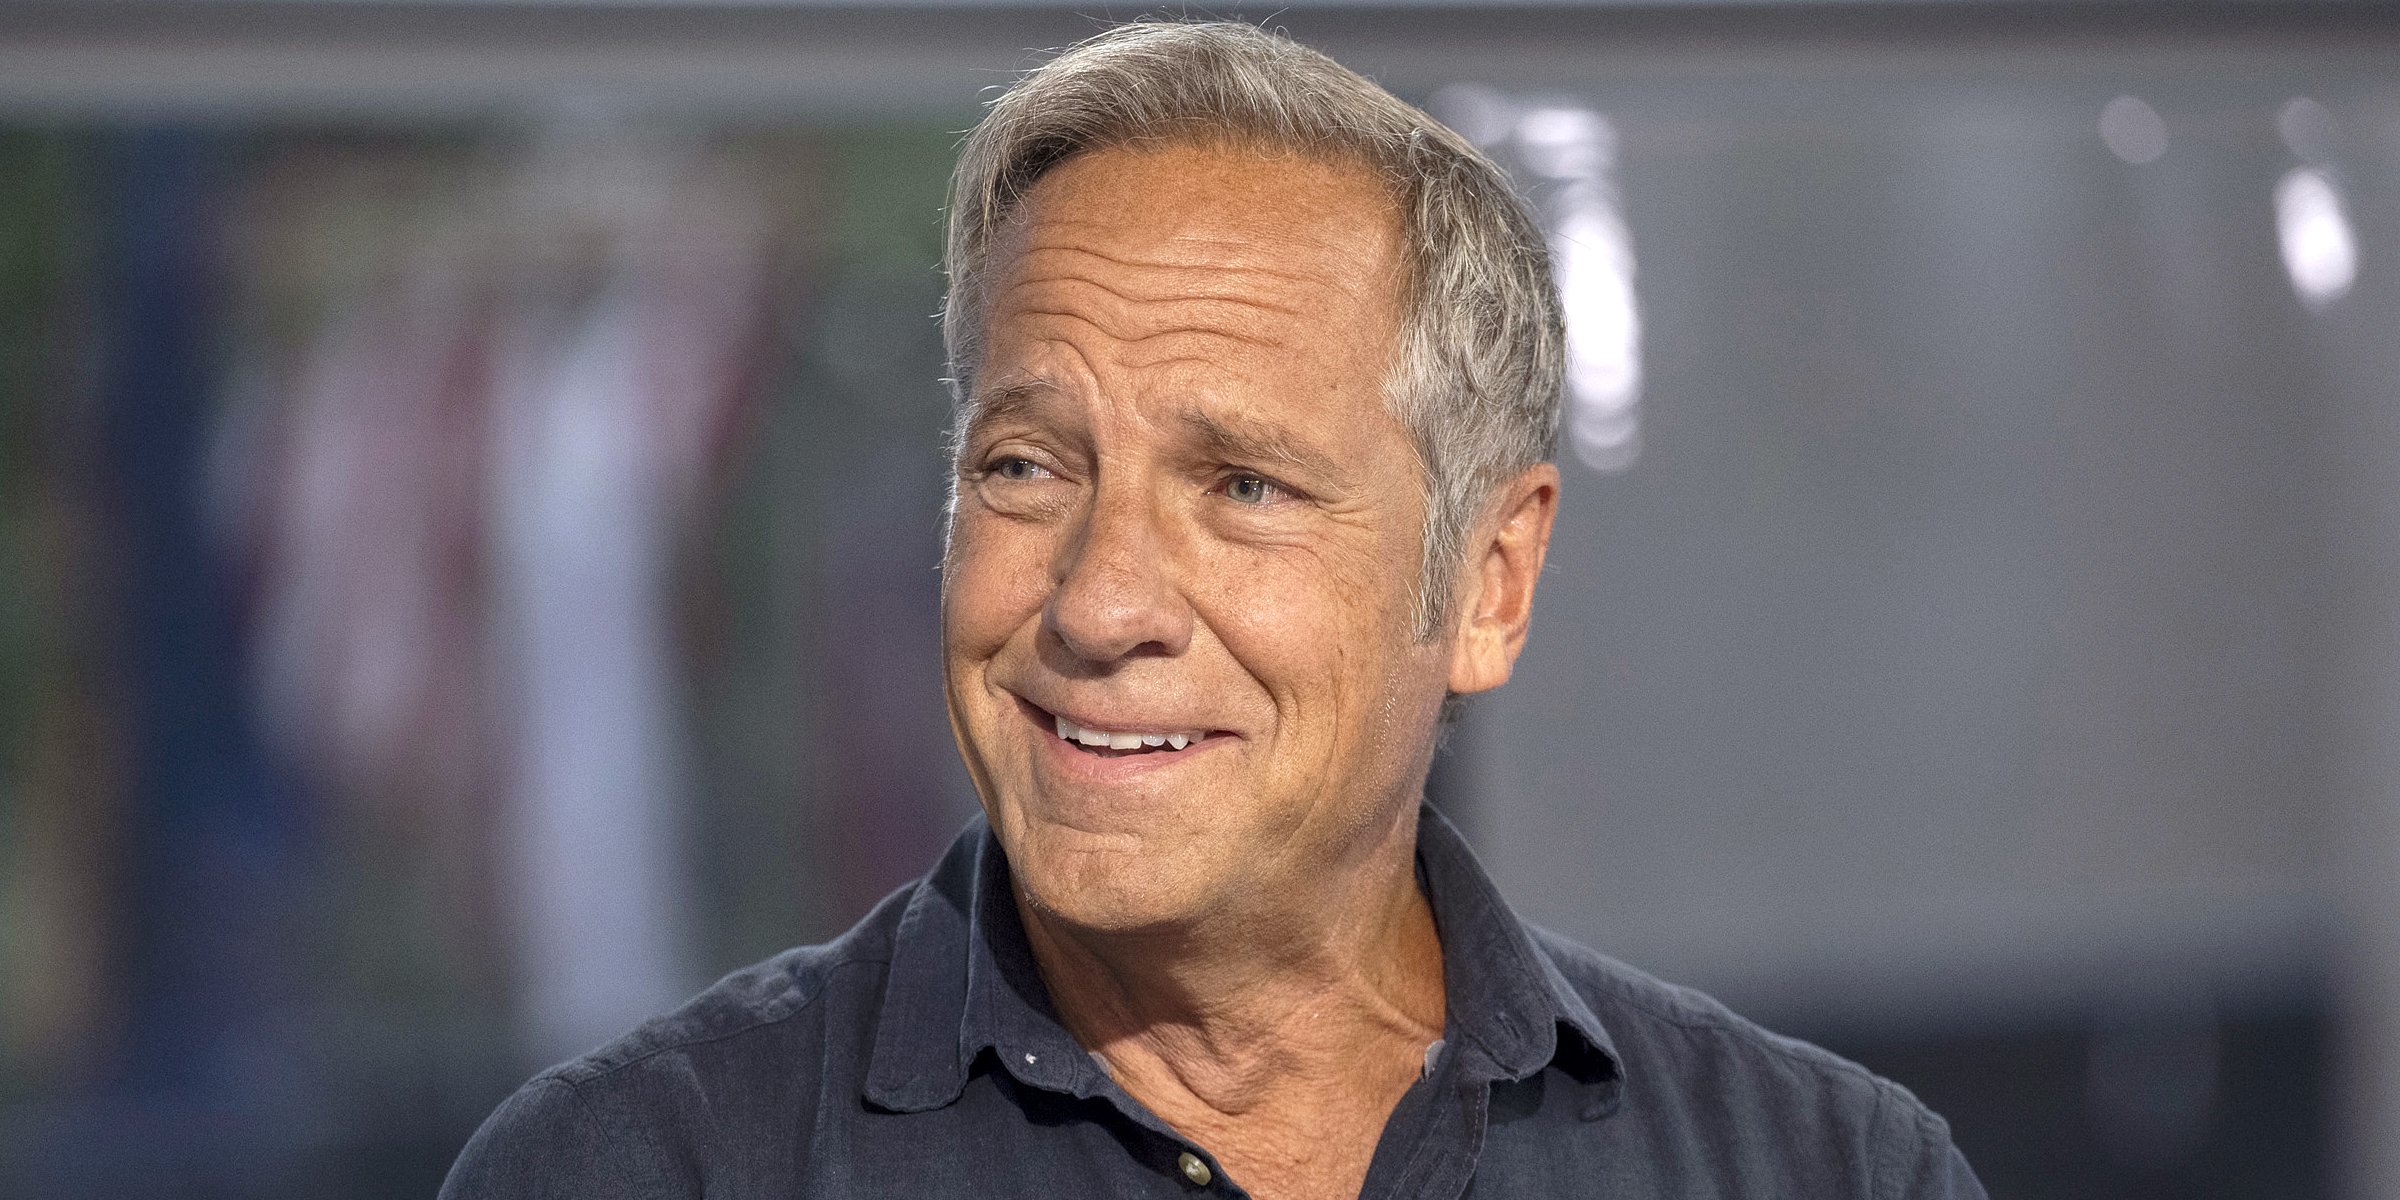 Mike Rowe | Source: Getty Images